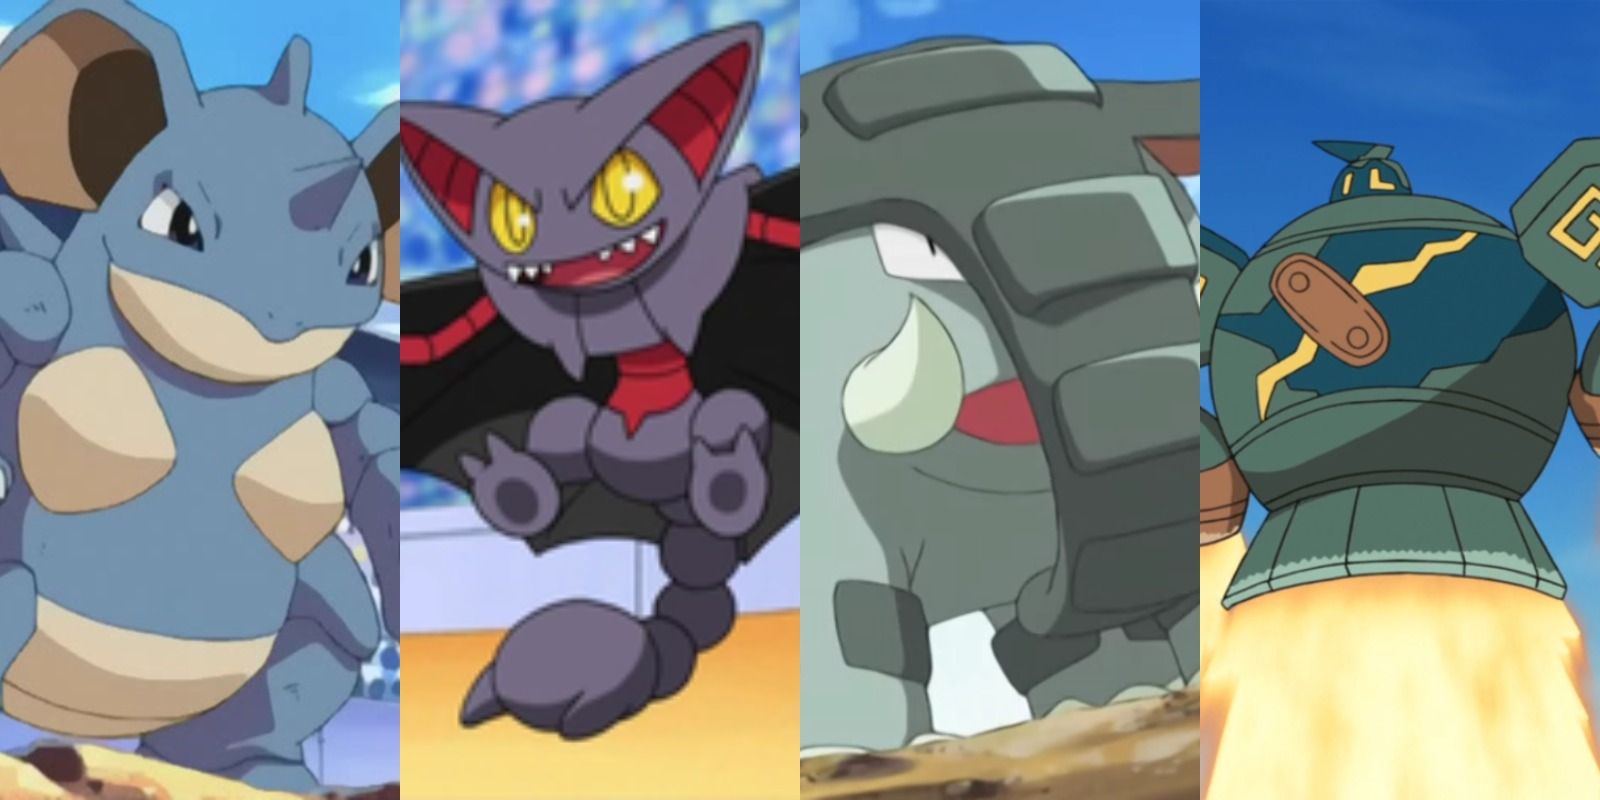 Split image of a group of Ground type Pokemon from the anime including Nidoqueen, Gliscor, Donphan, and Golurk